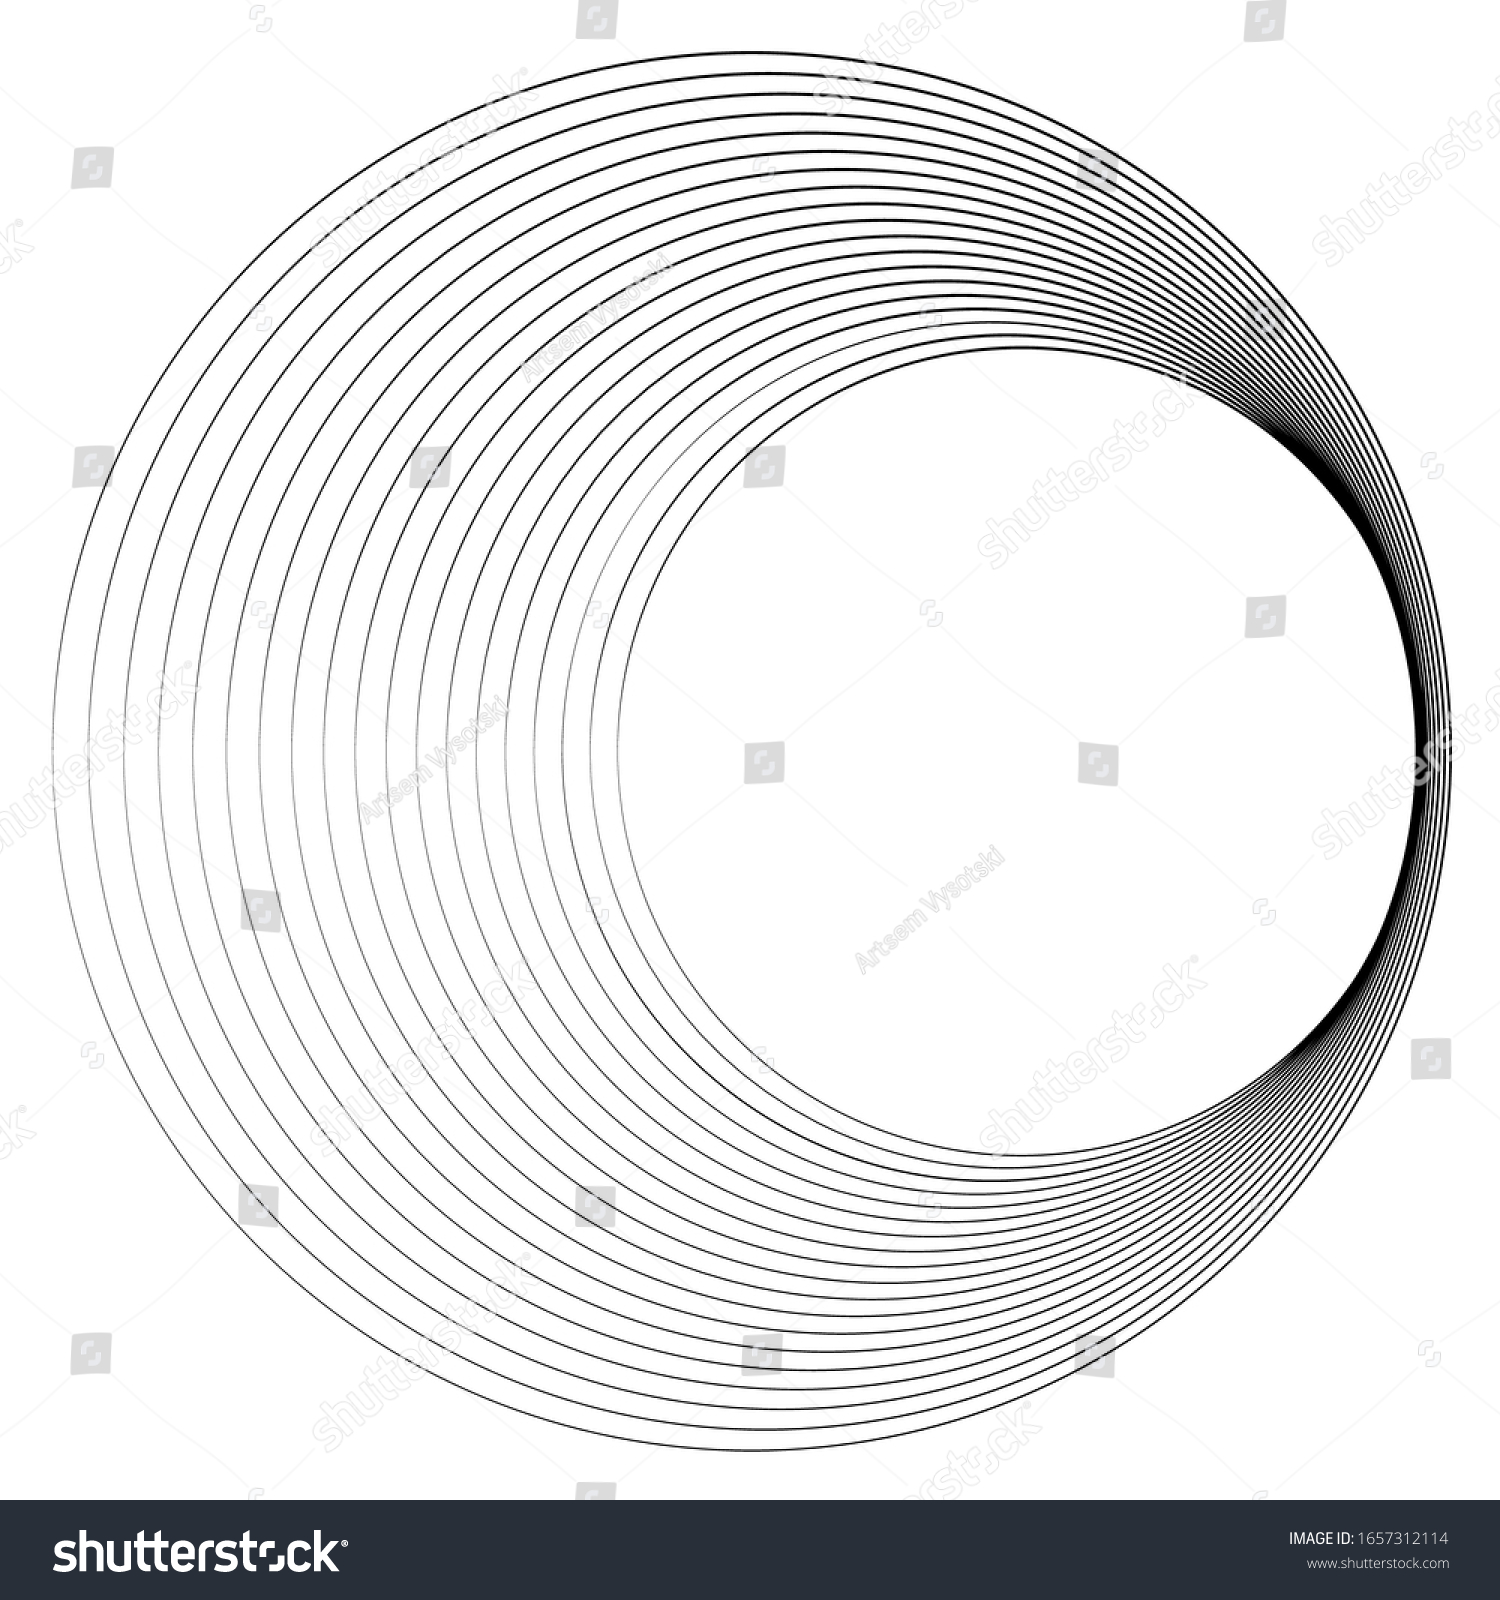 101,813 Circle radiation Images, Stock Photos & Vectors | Shutterstock